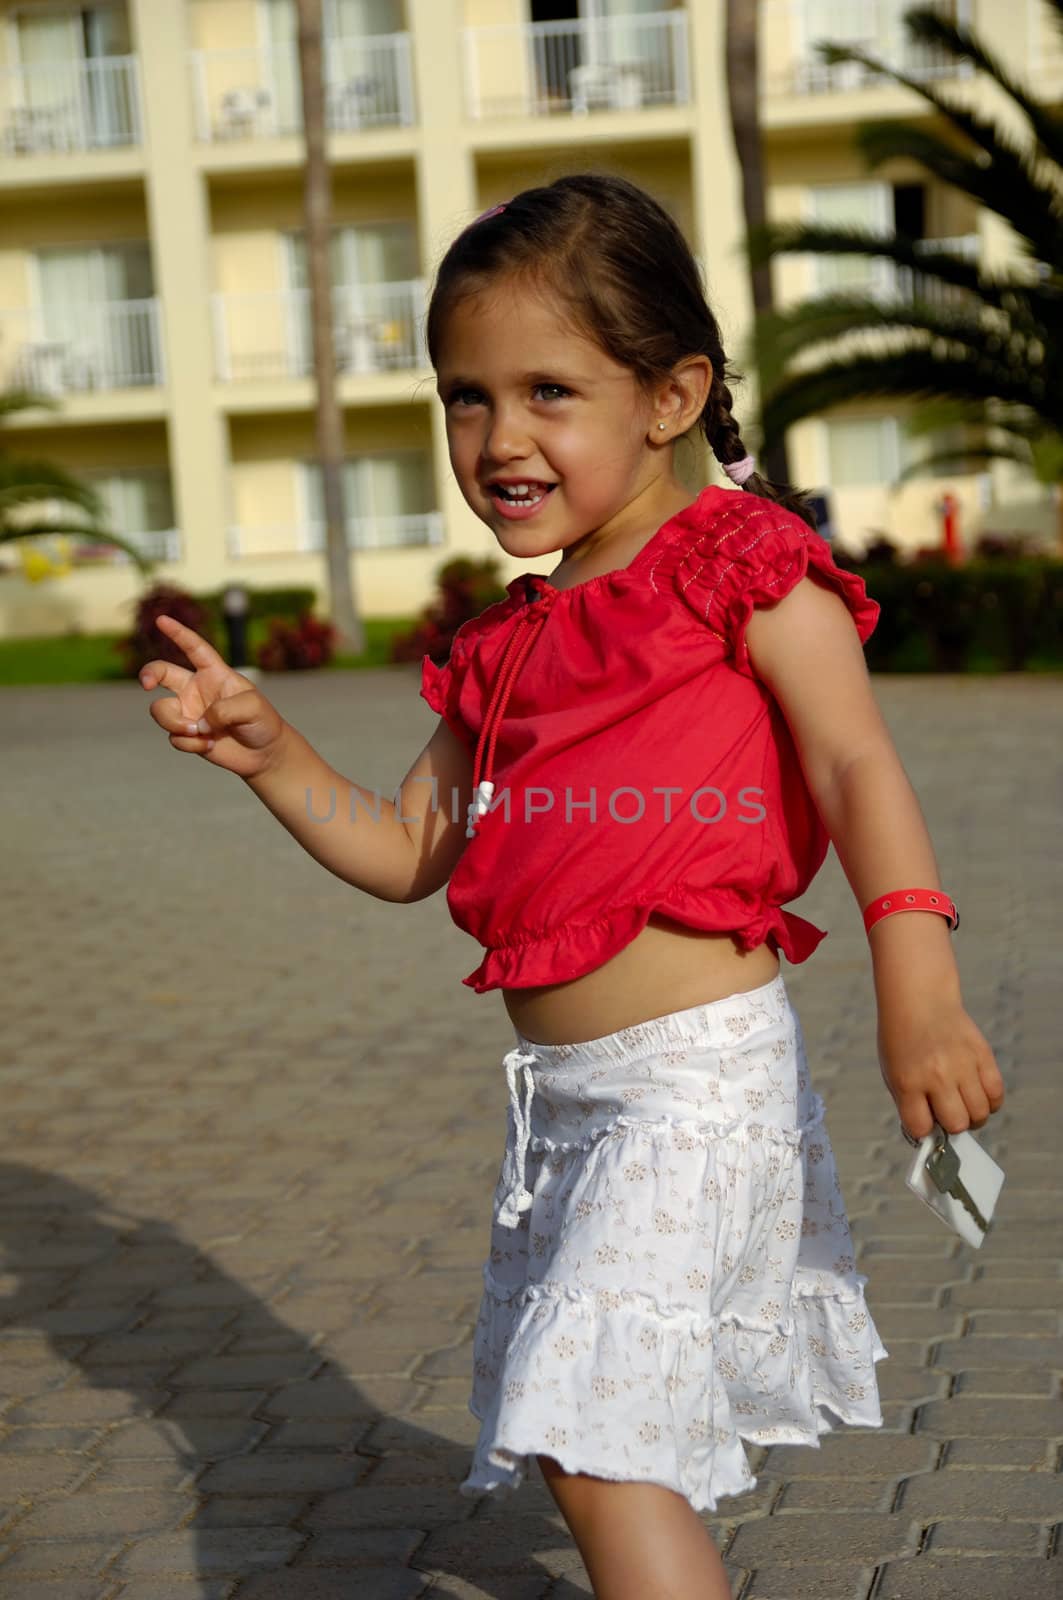 Happy child holding is holding a hotel key in one hand and pointing with the other